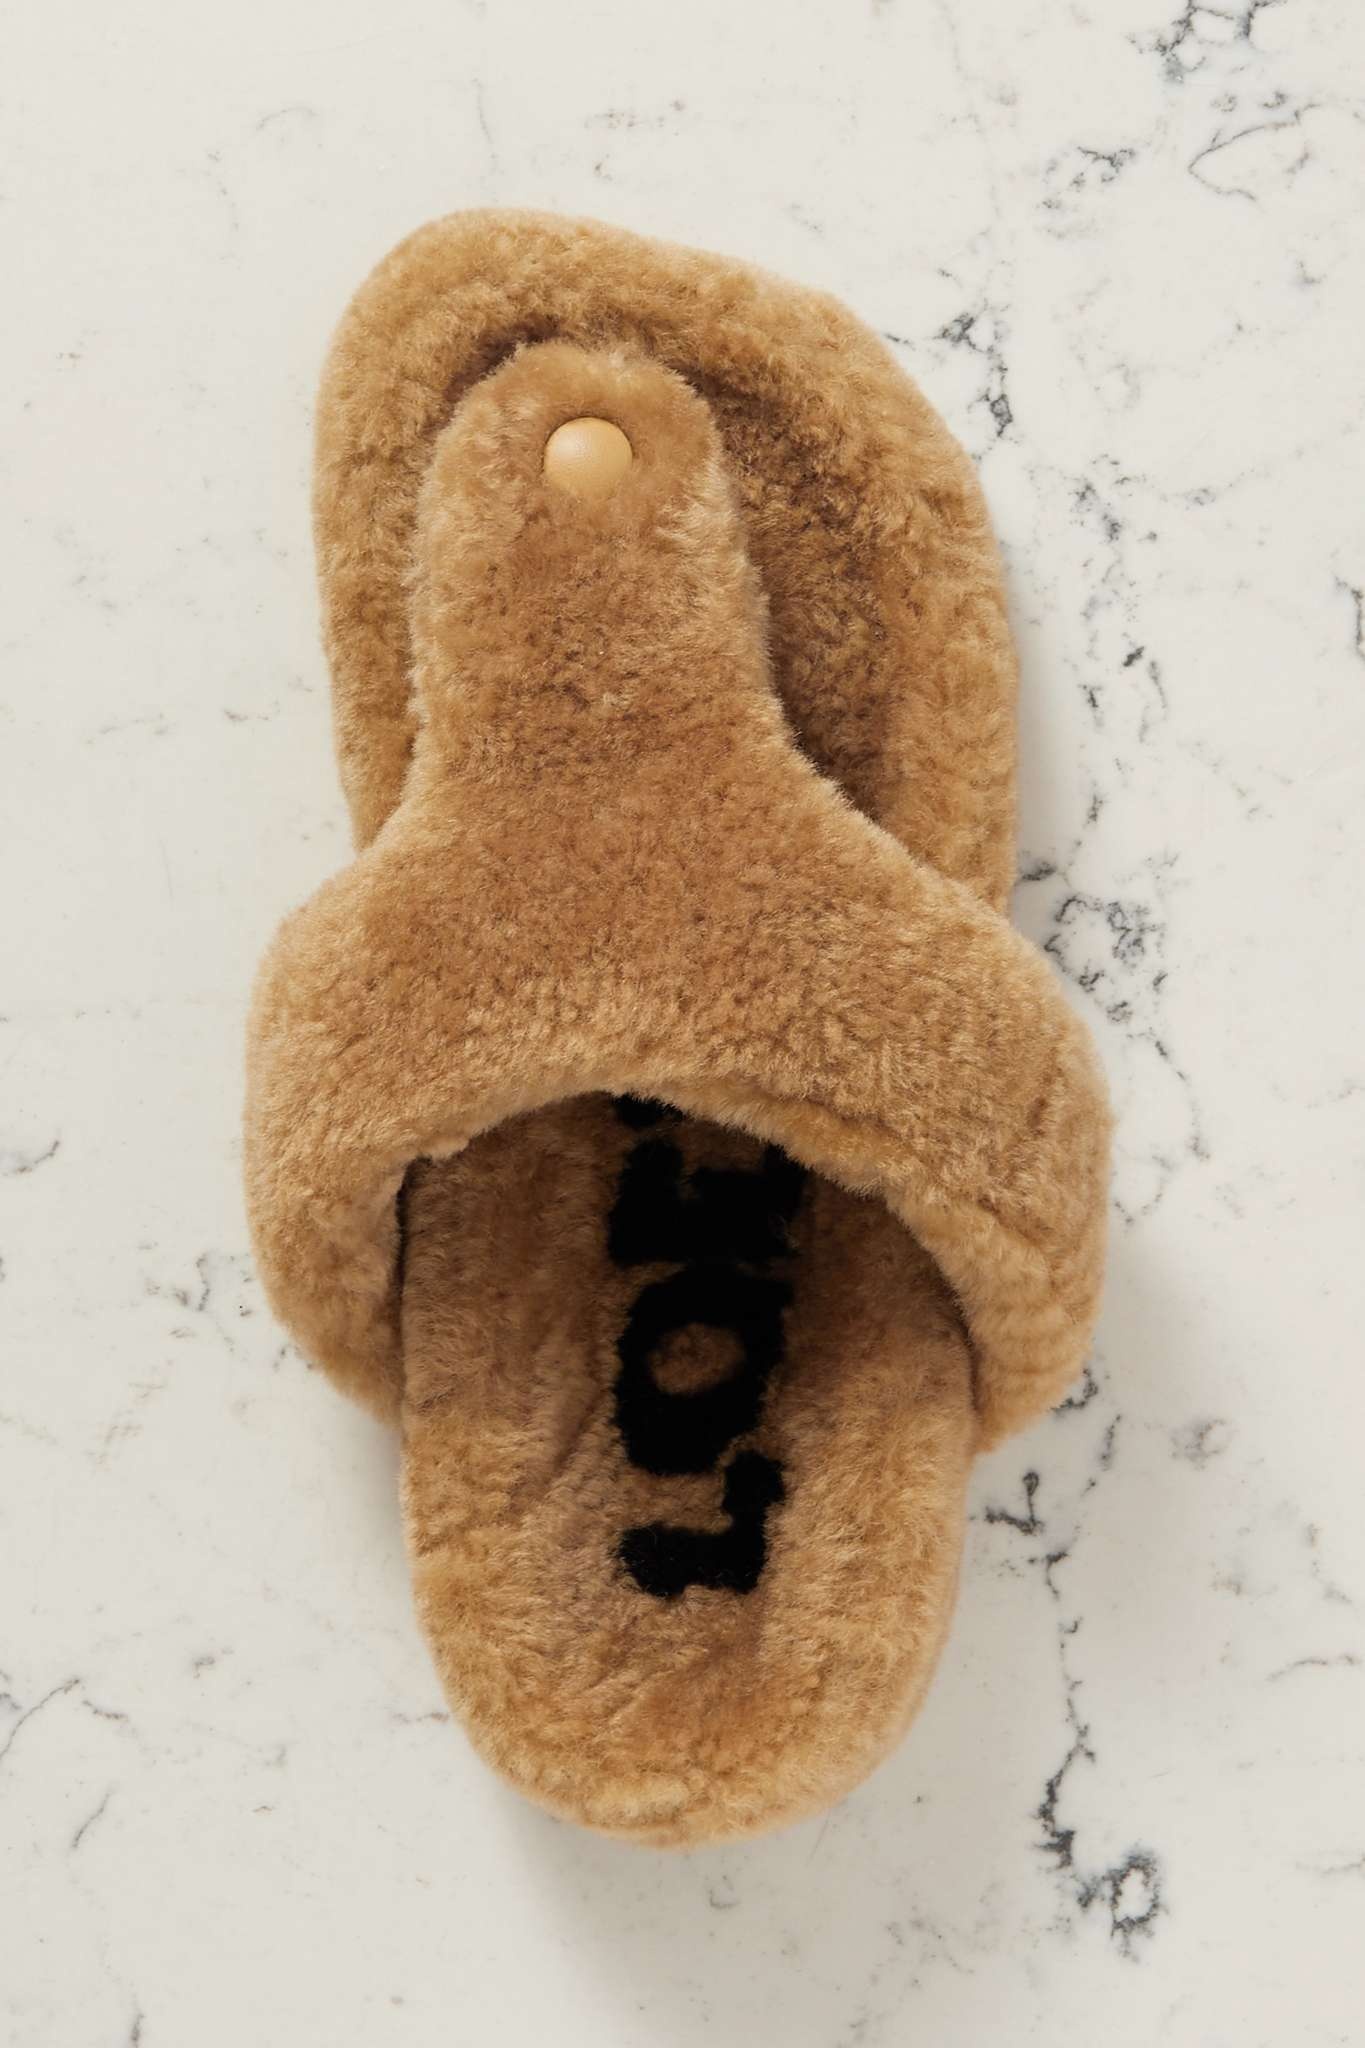 Shearling sandals - 5